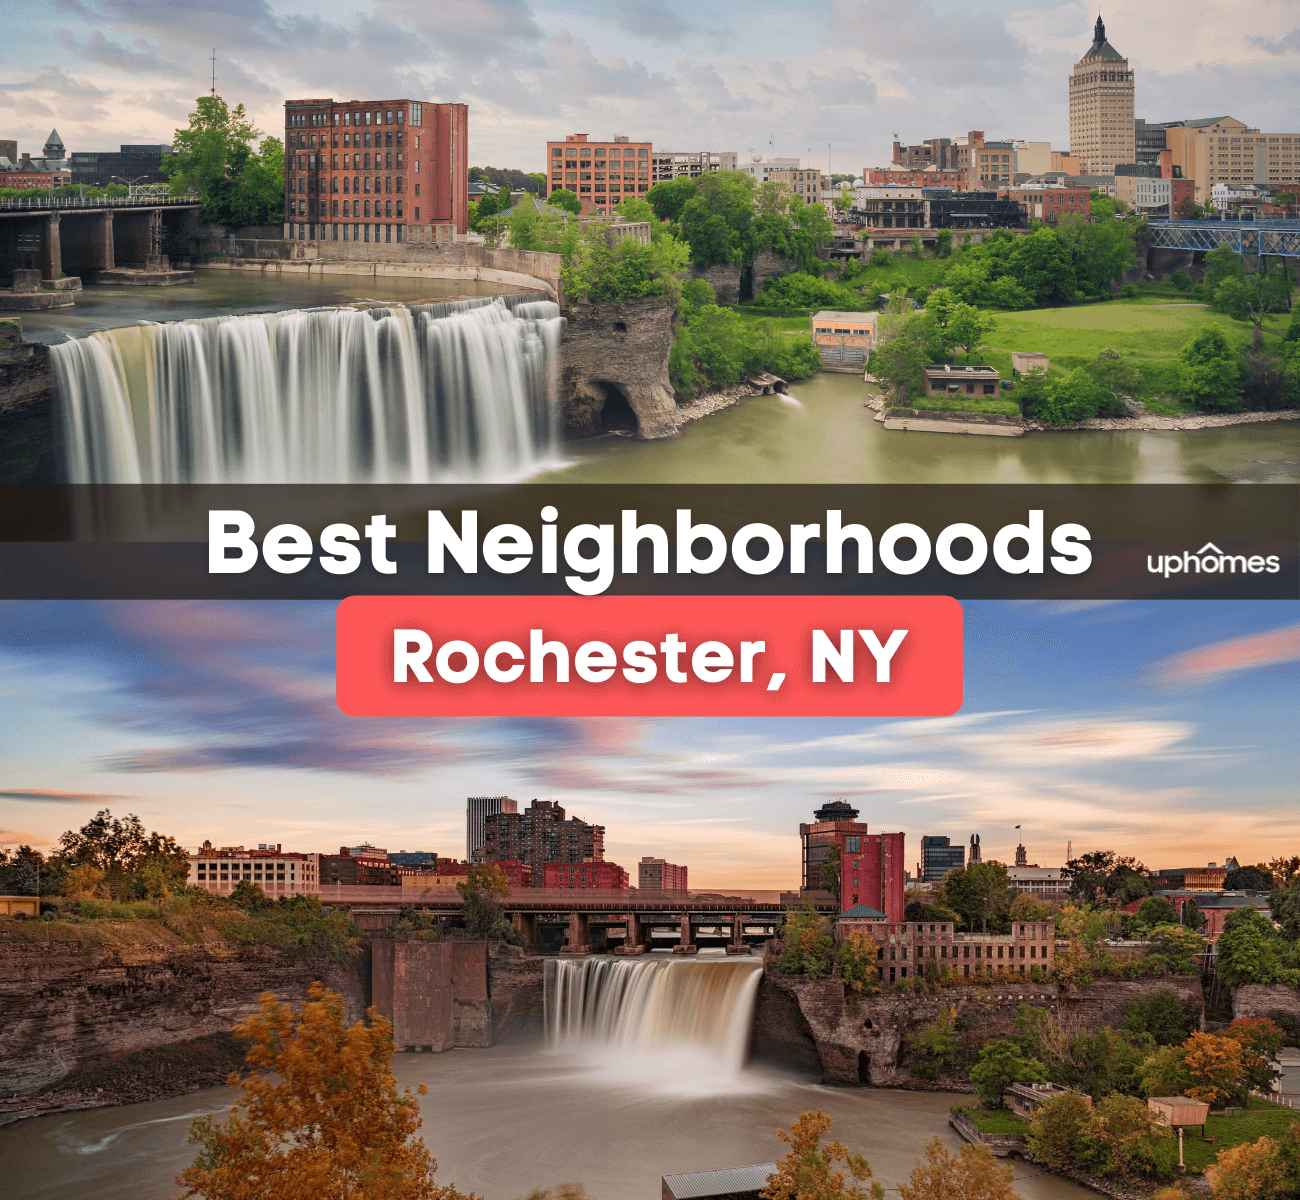 Best Neighborhoods in Rochester, NY - Here are the Best Places to Live in Rochester